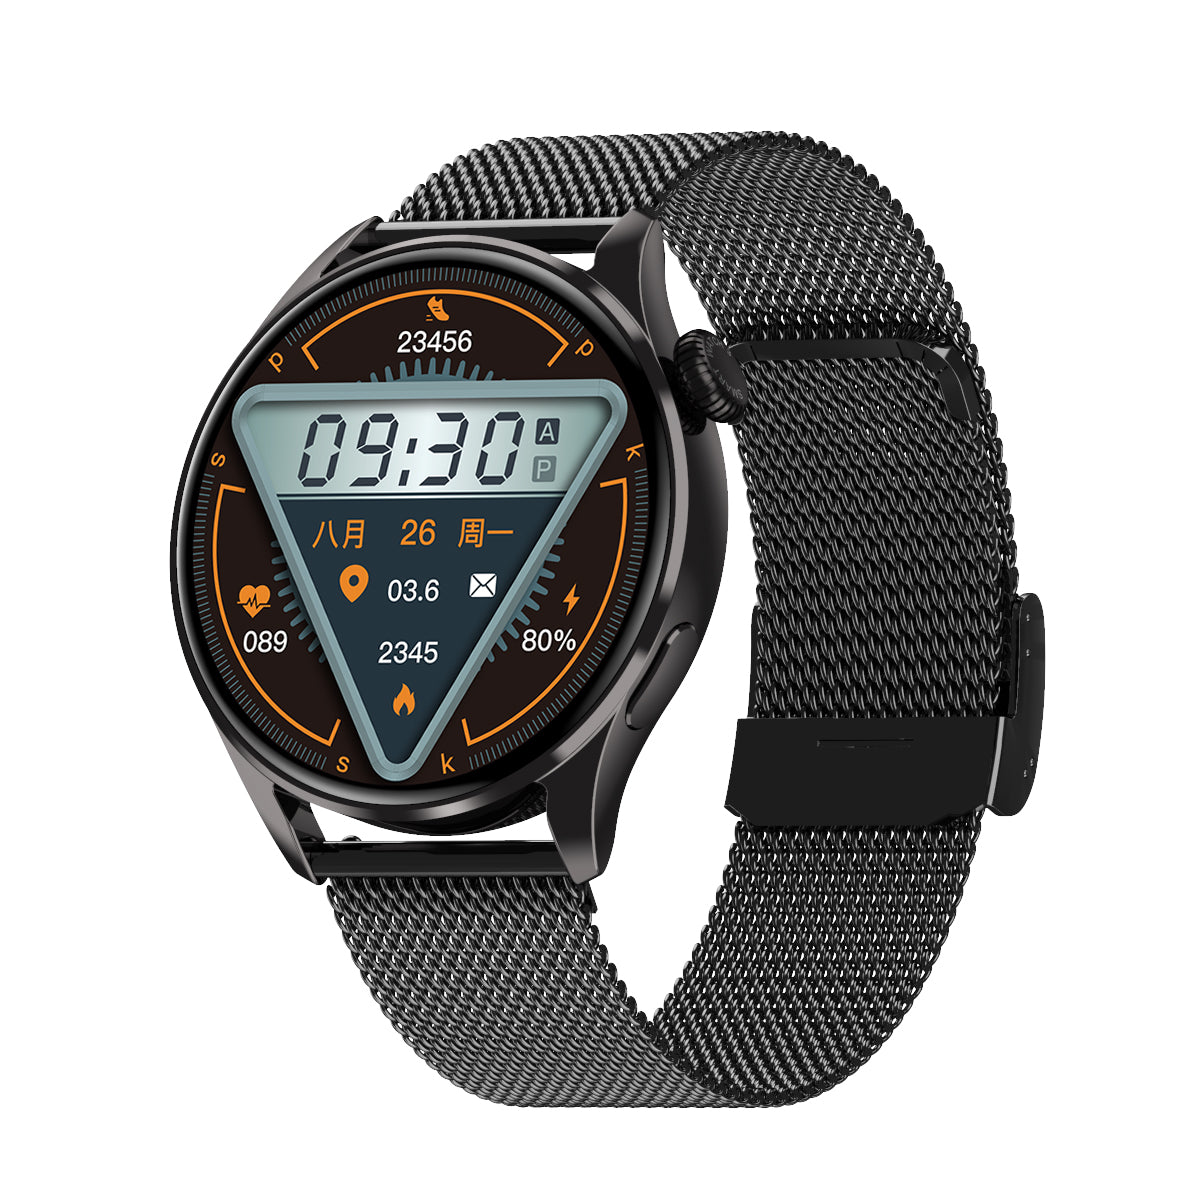 Bearscome Q3 Max Blood glucose oxygen blood pressure monitor Compass altitude barometric function.